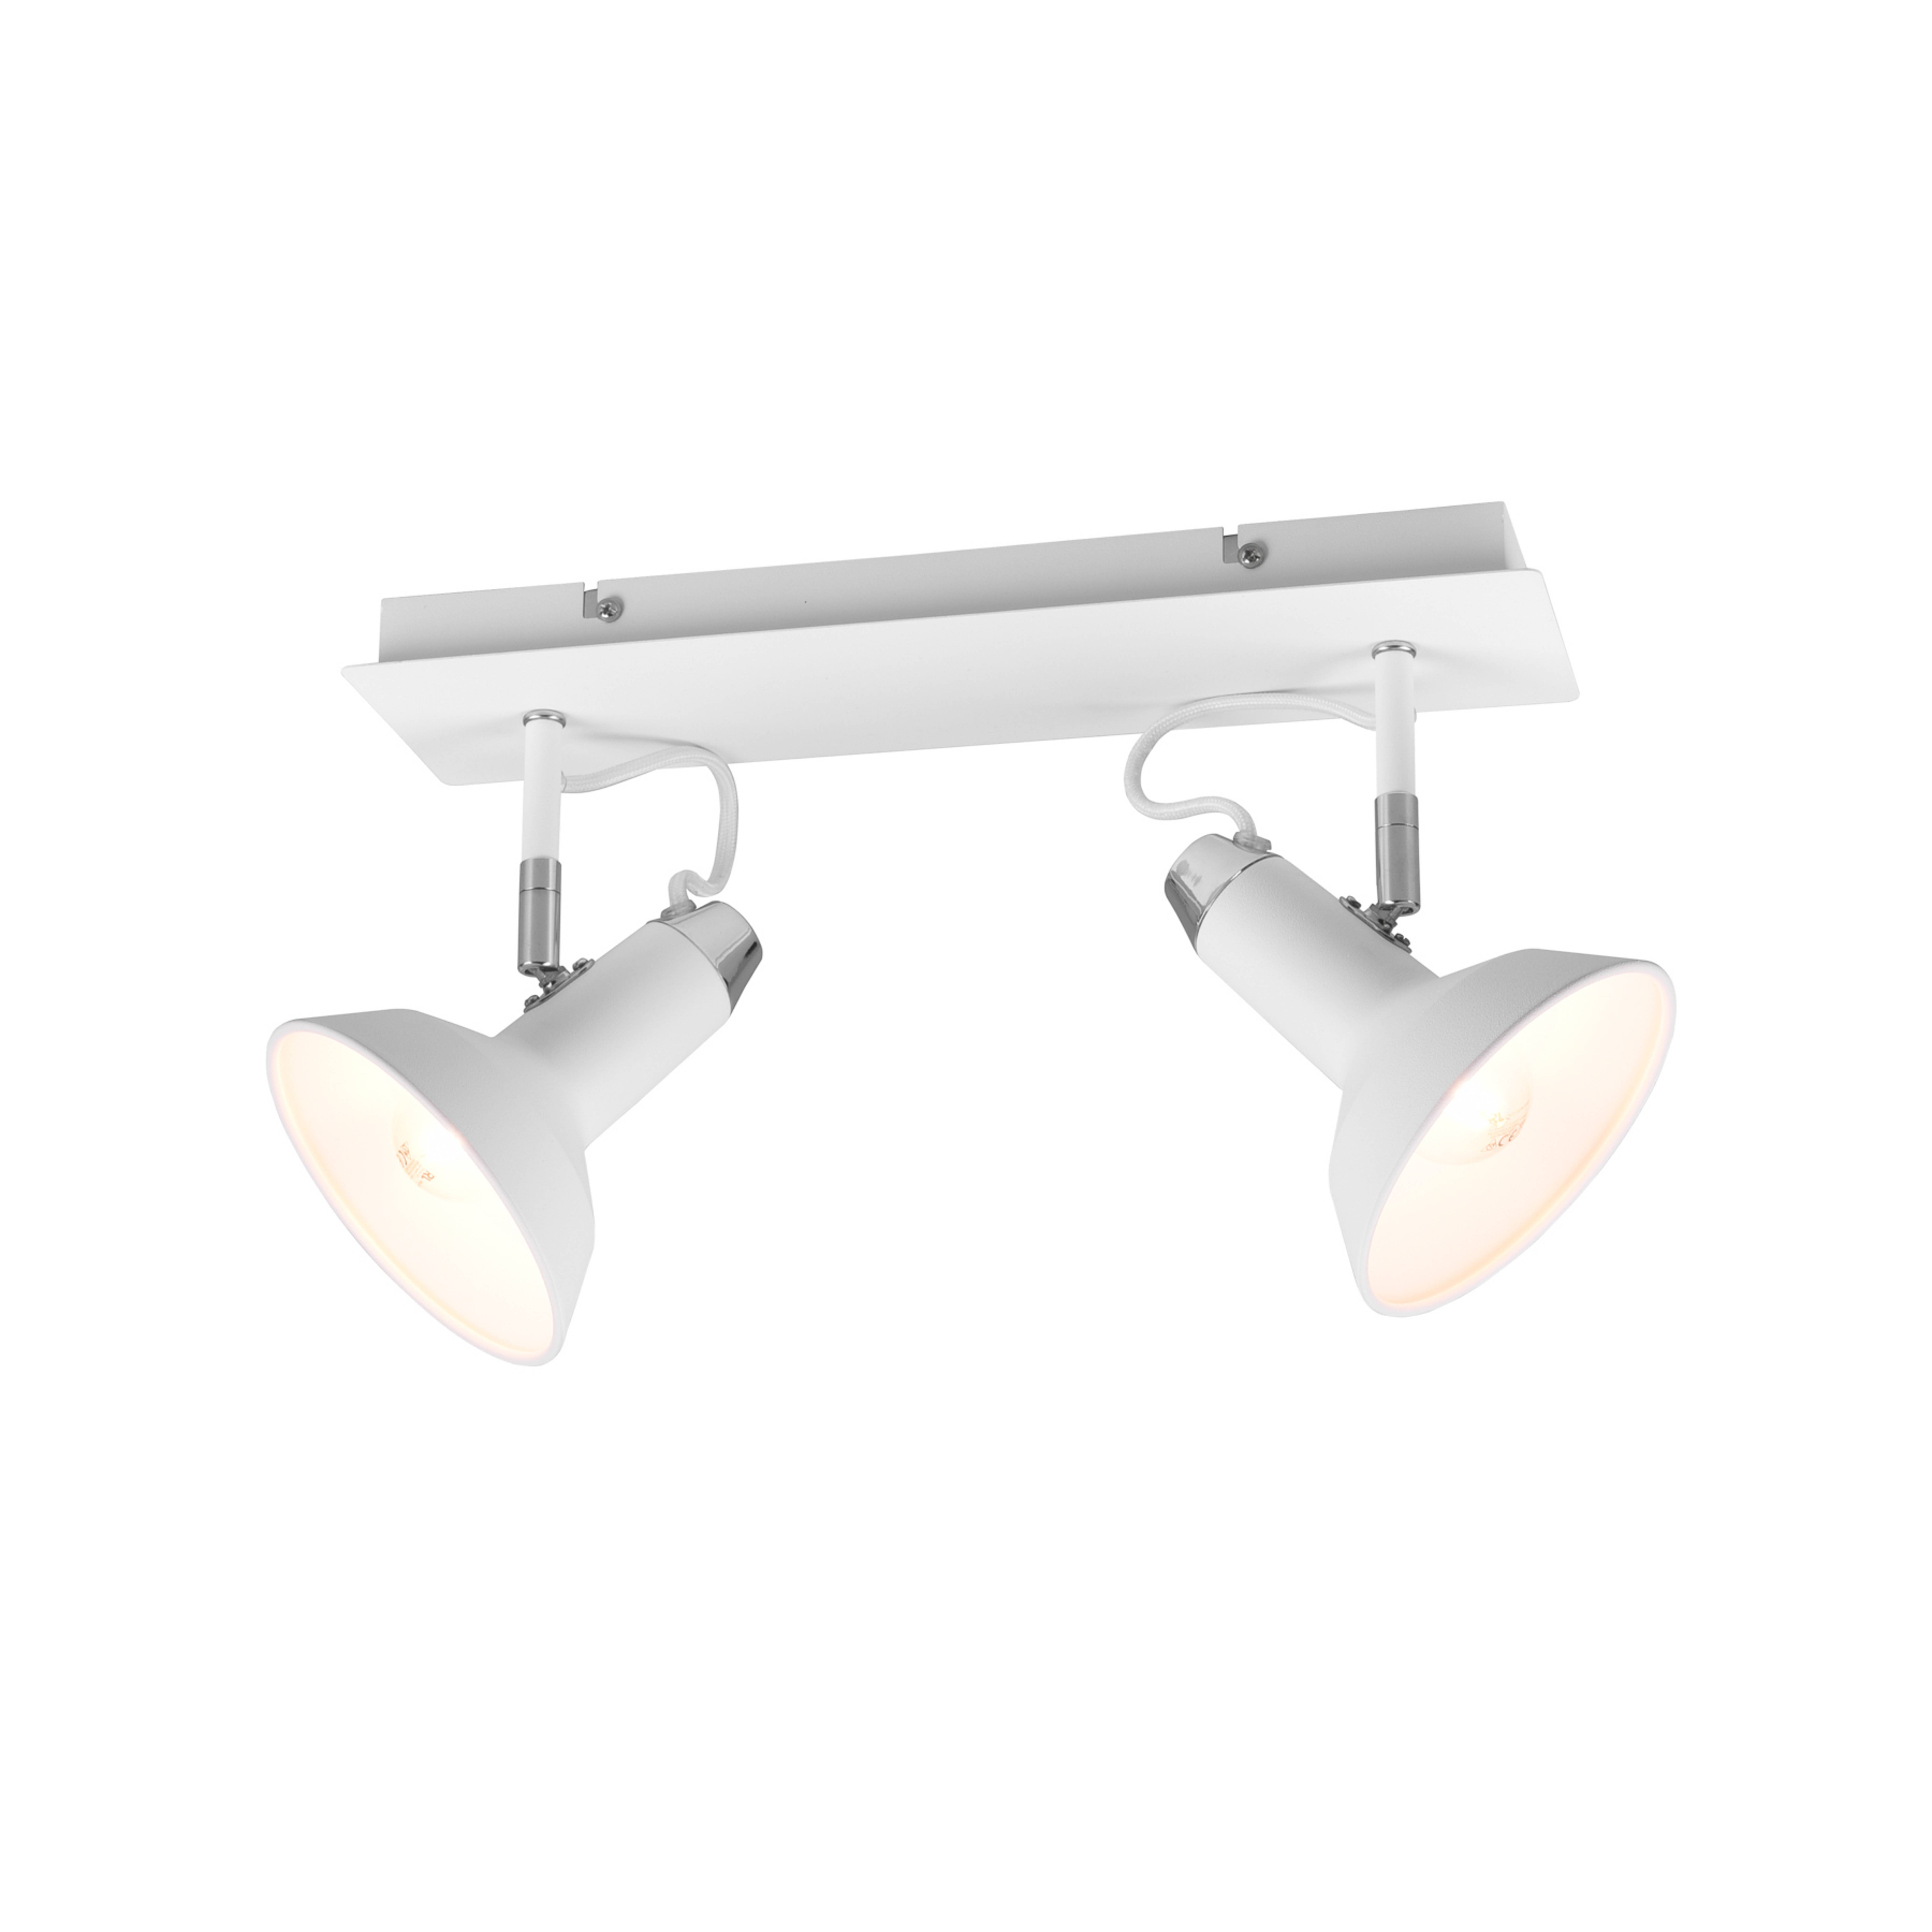 Downlight Roxie orientable 2 luces blanco mate